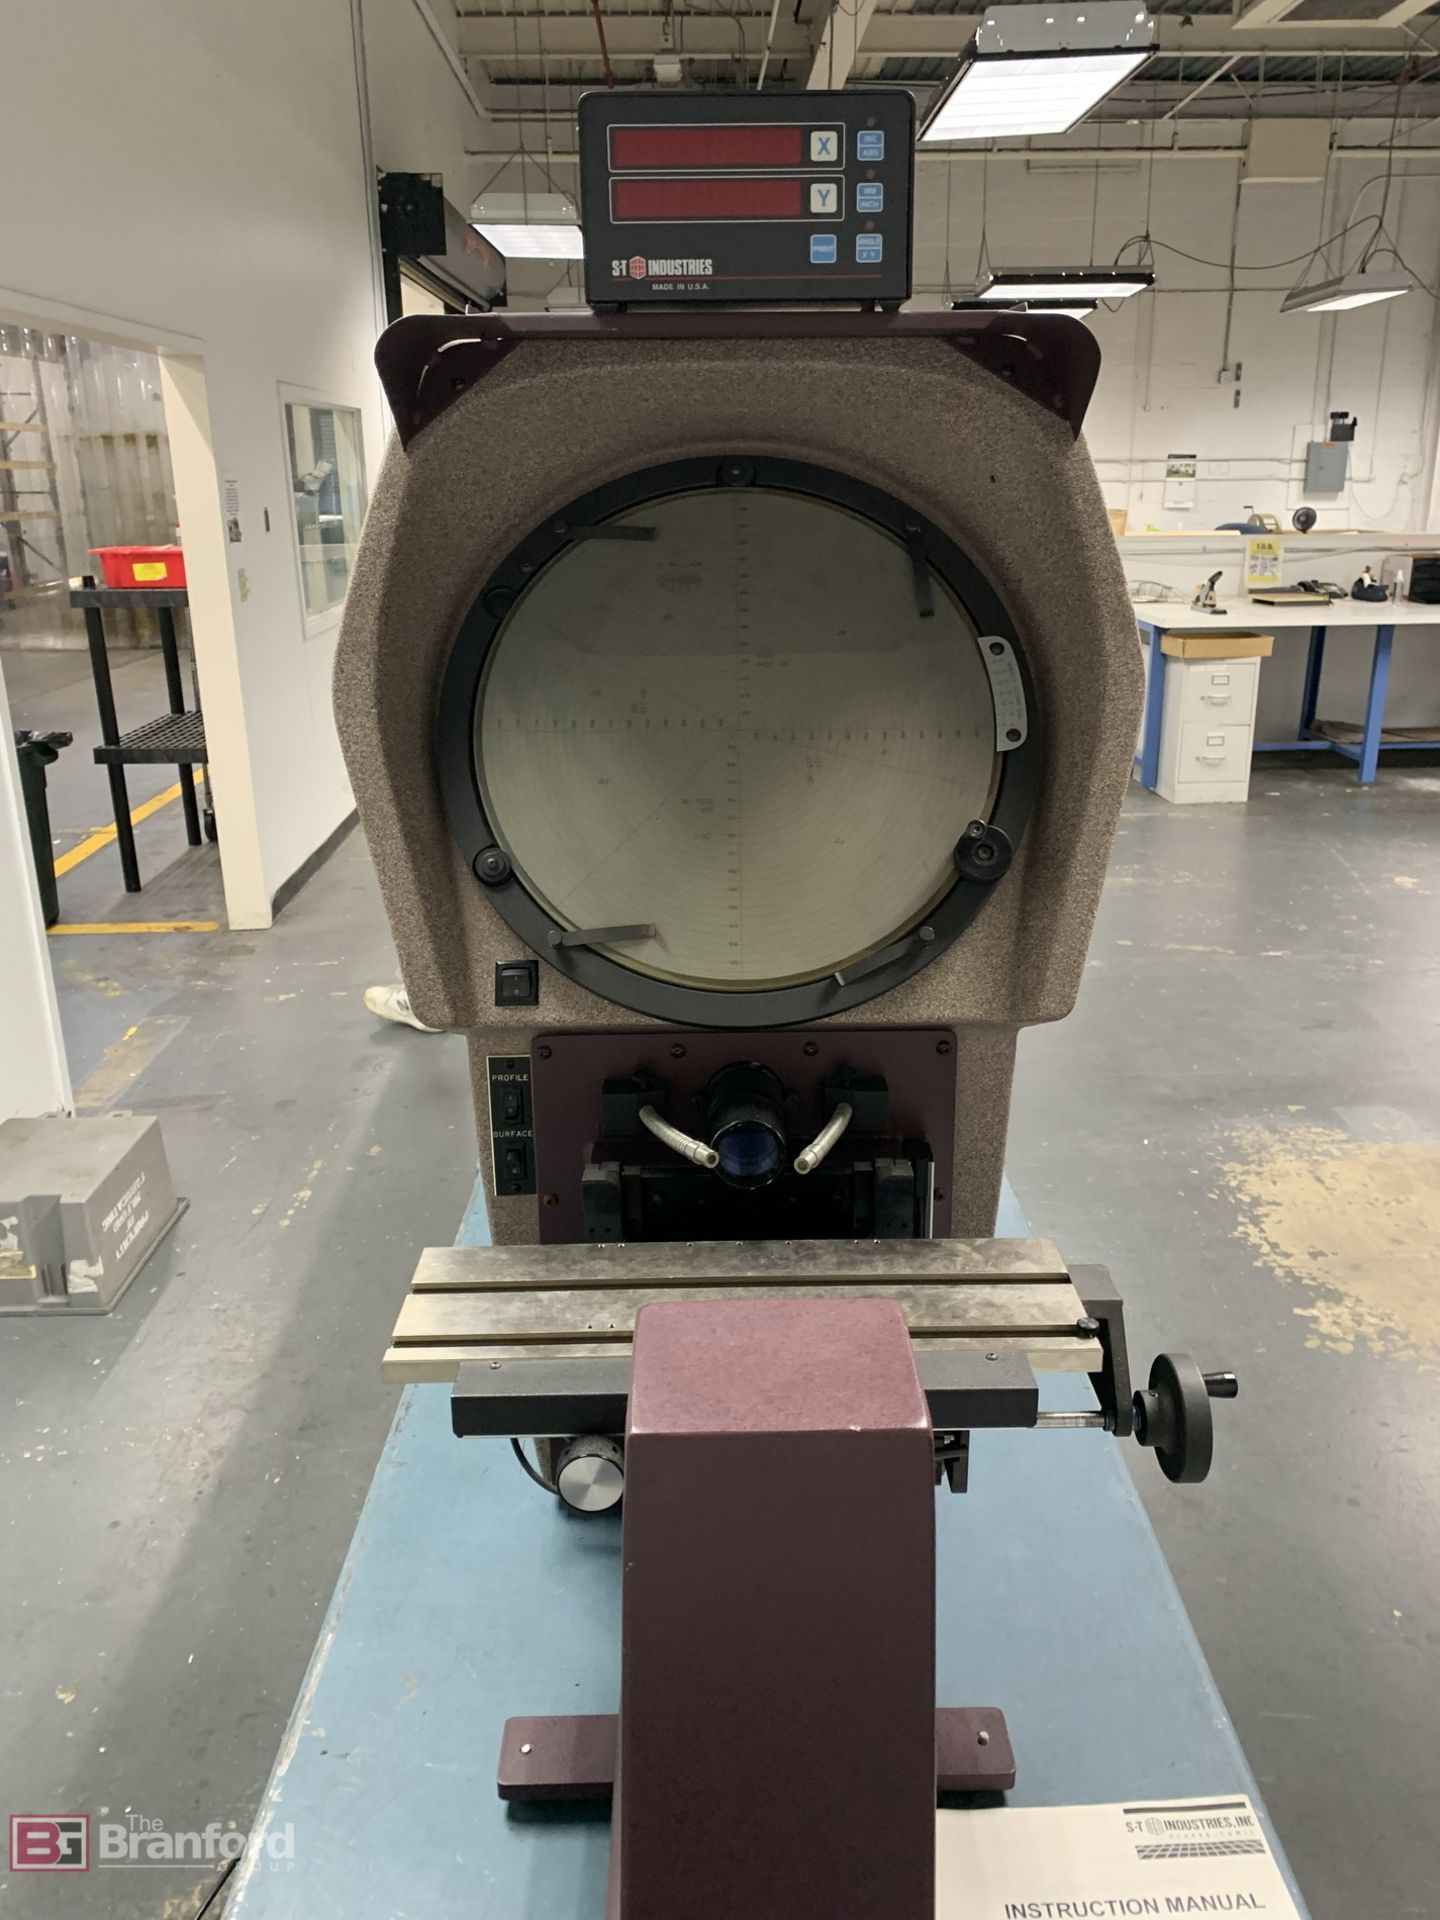 S-T Industries 14" Optical Comparator - Image 3 of 7